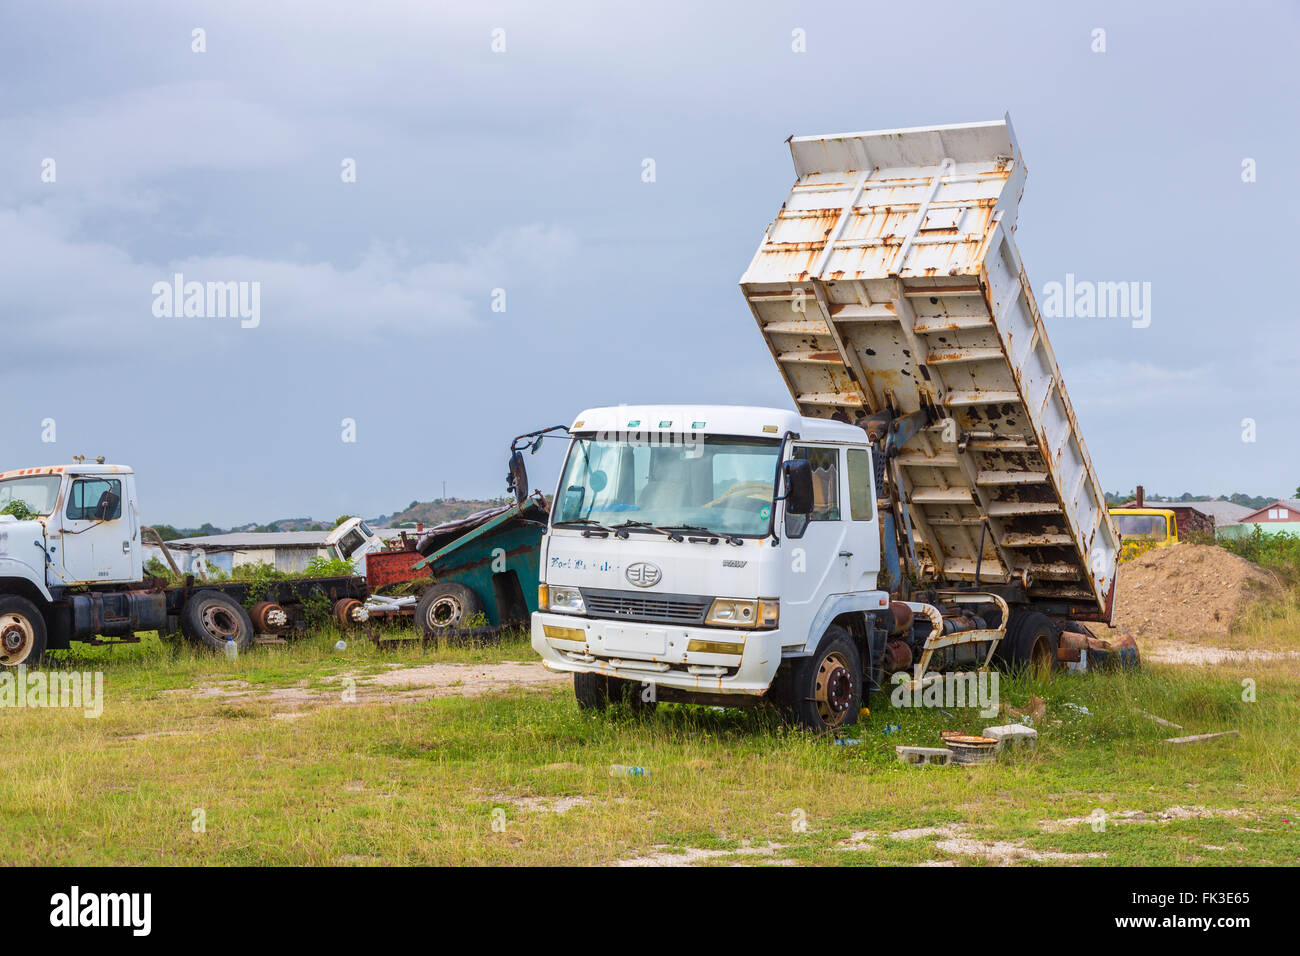 Rusting FAW Automotive tipper truck, Ogg Spencer's Trucking scrapyard, Liberta, south Antigua, Antigua and Barbuda, West Indies Stock Photo